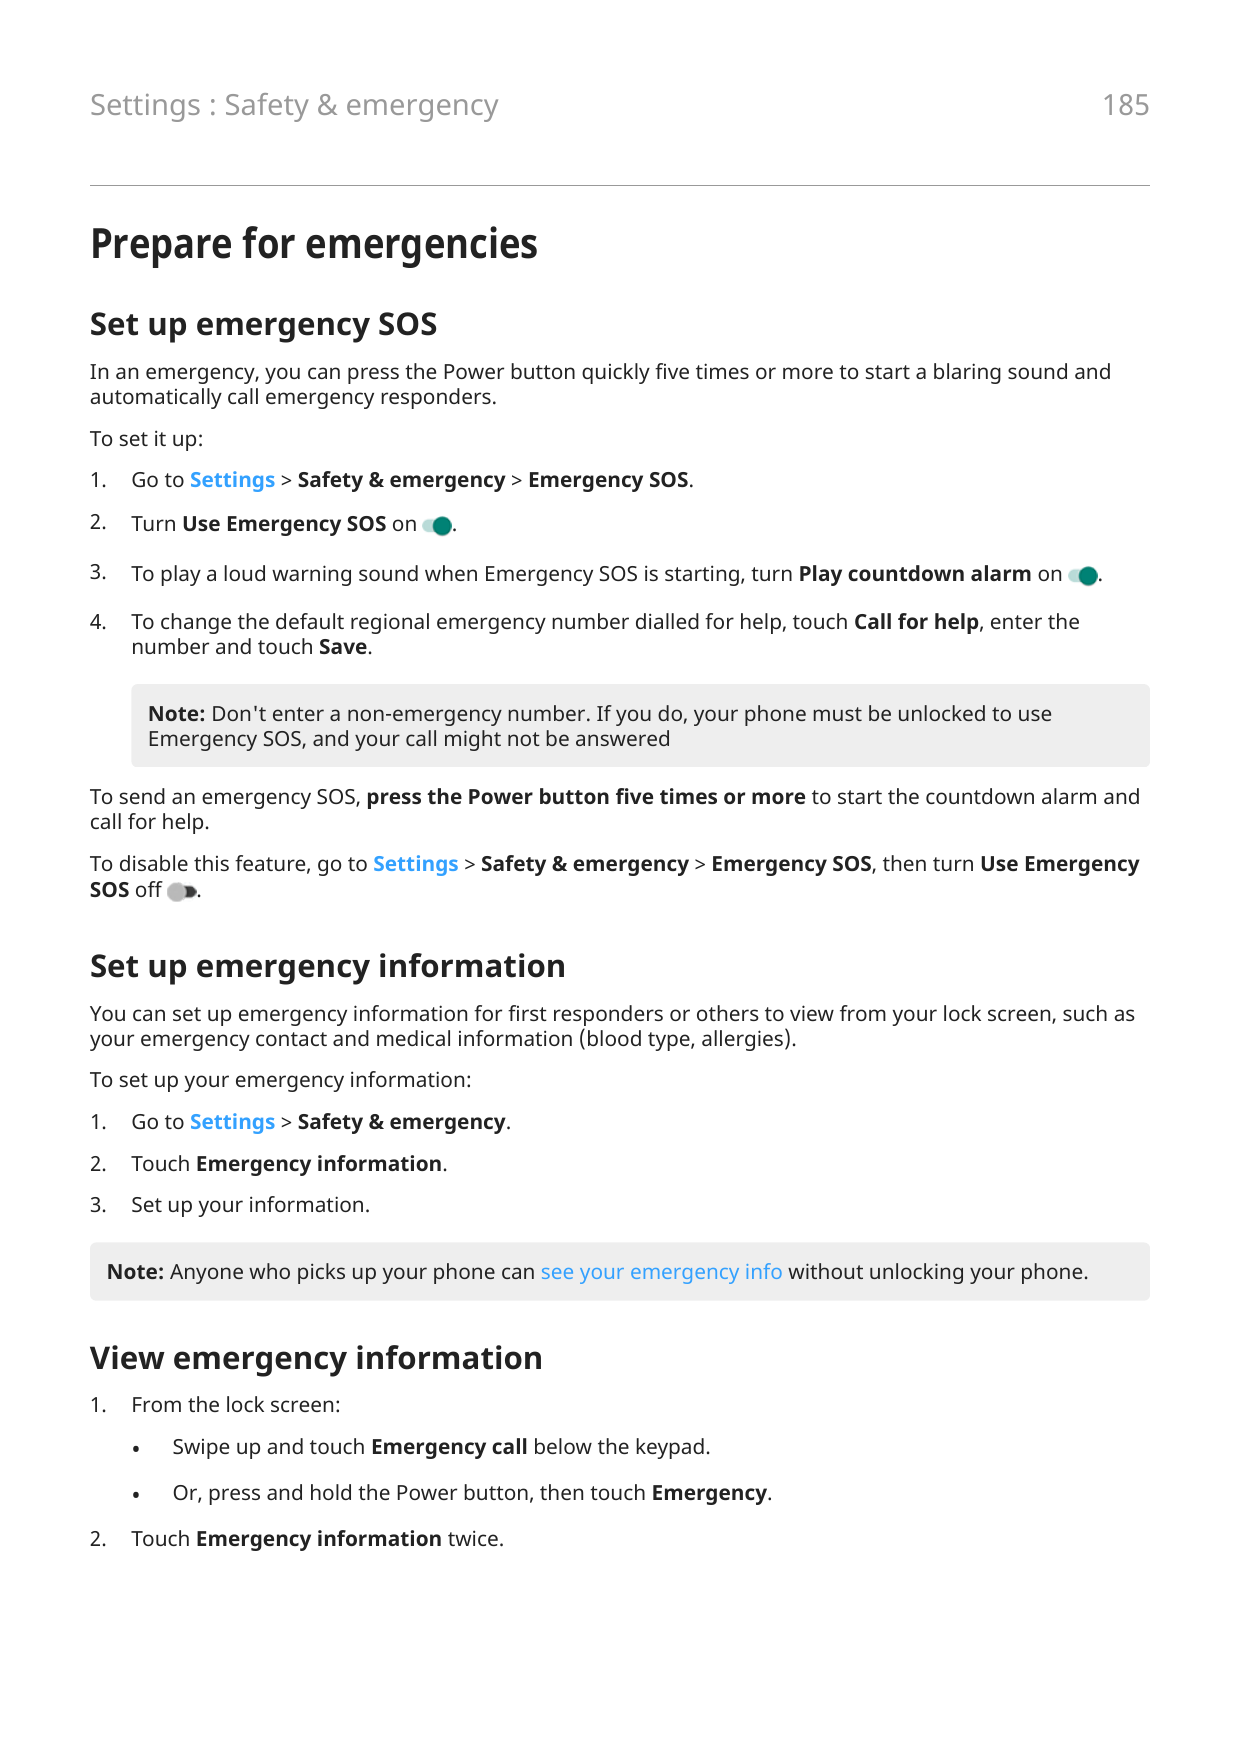 Settings : Safety & emergency185Prepare for emergenciesSet up emergency SOSIn an emergency, you can press the Power button quick